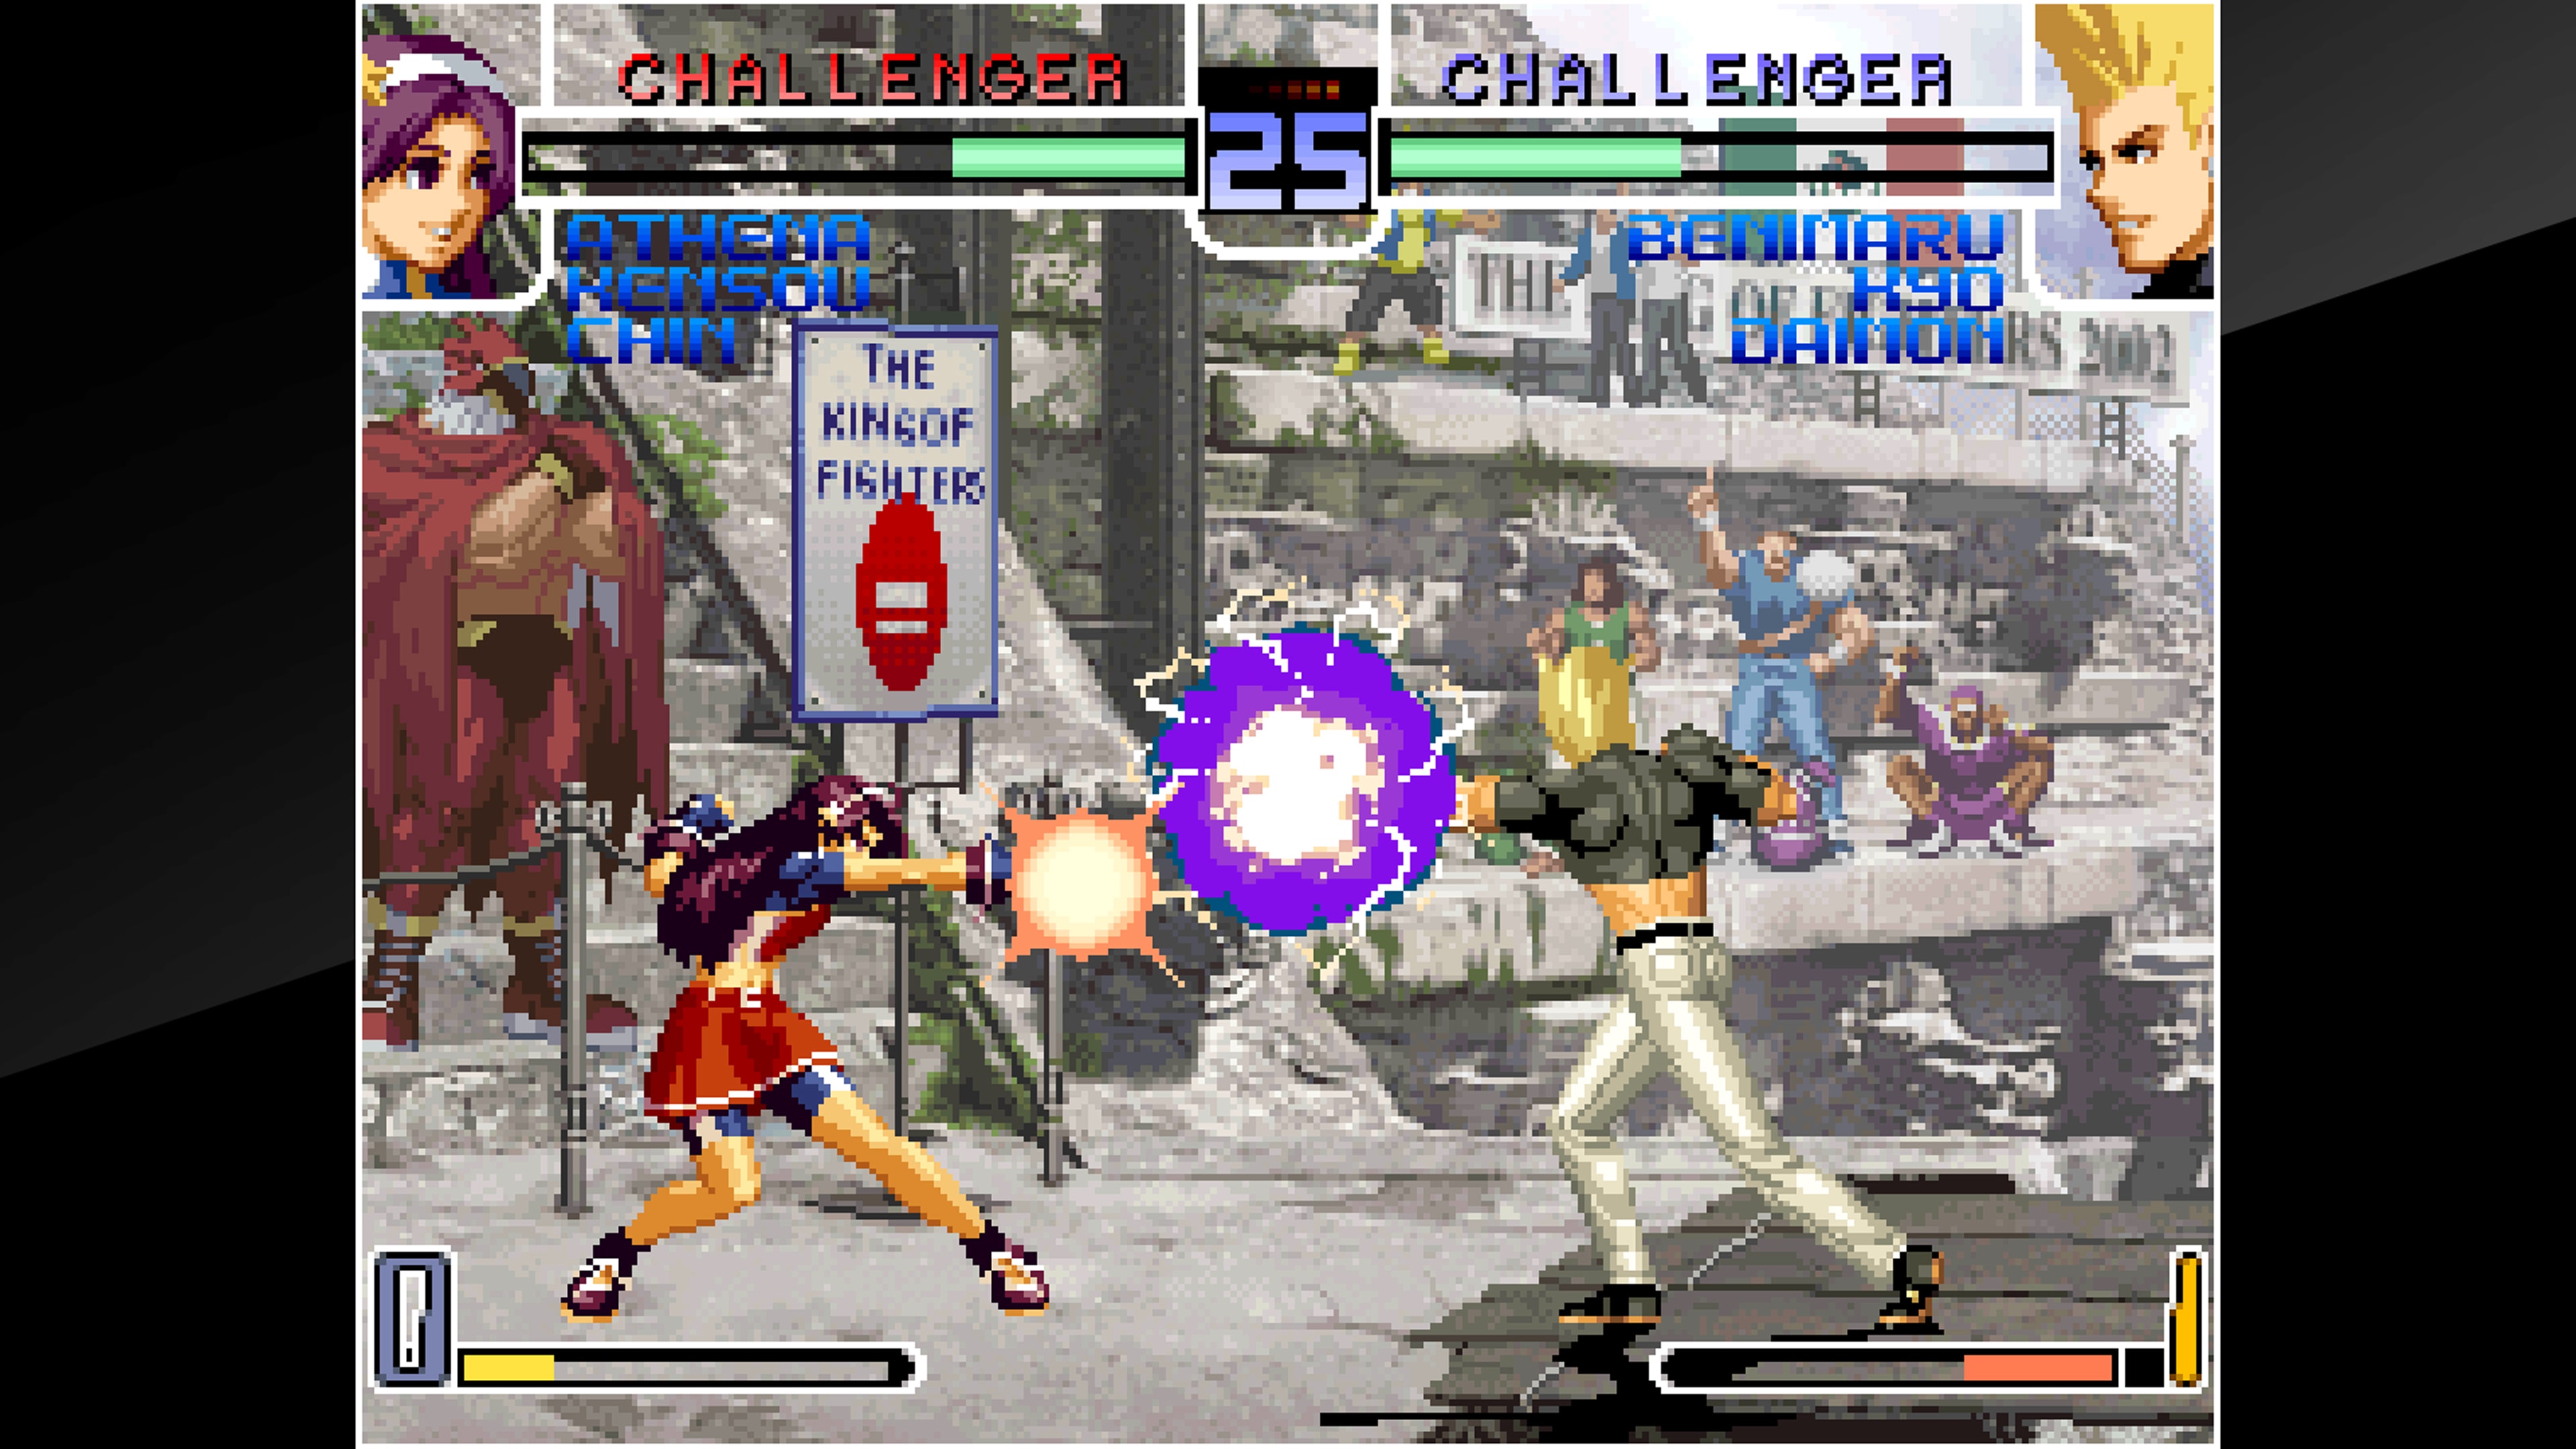 The King of Fighters 2002 (SNK Best Collection) 4964808300686